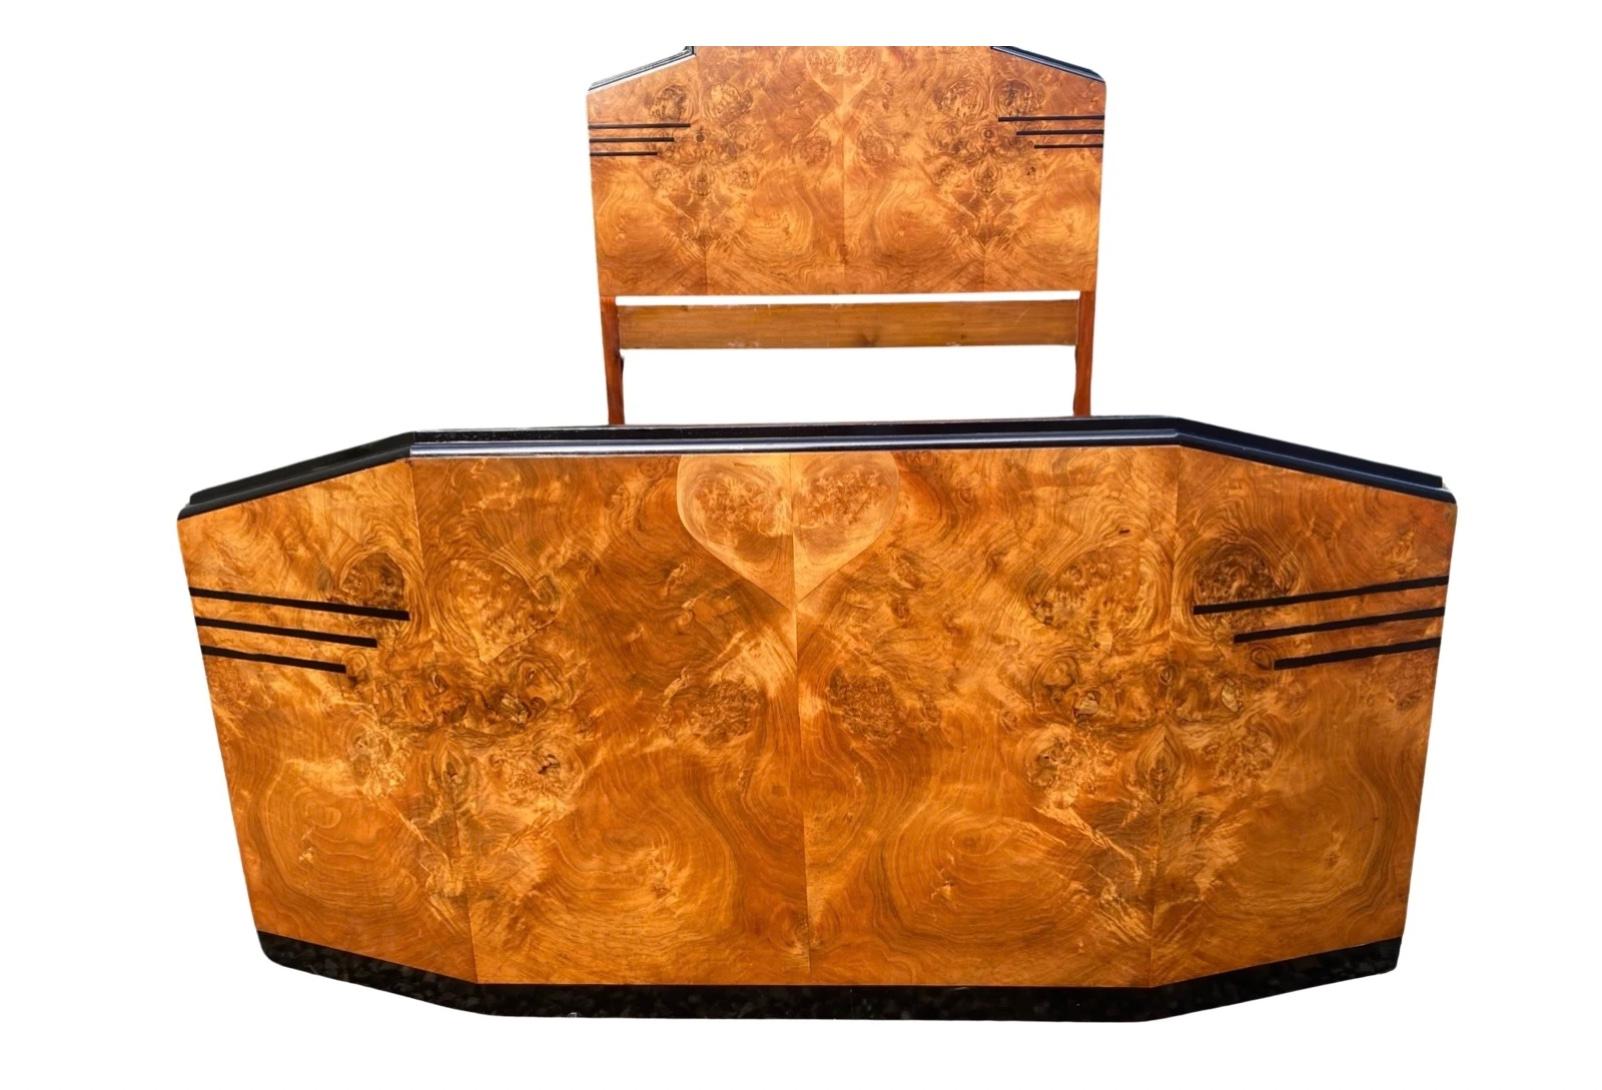 Striking Art Deco Hexagonal Fronted Burr Walnut and ebonised Double Bed1751750 For Sale 2